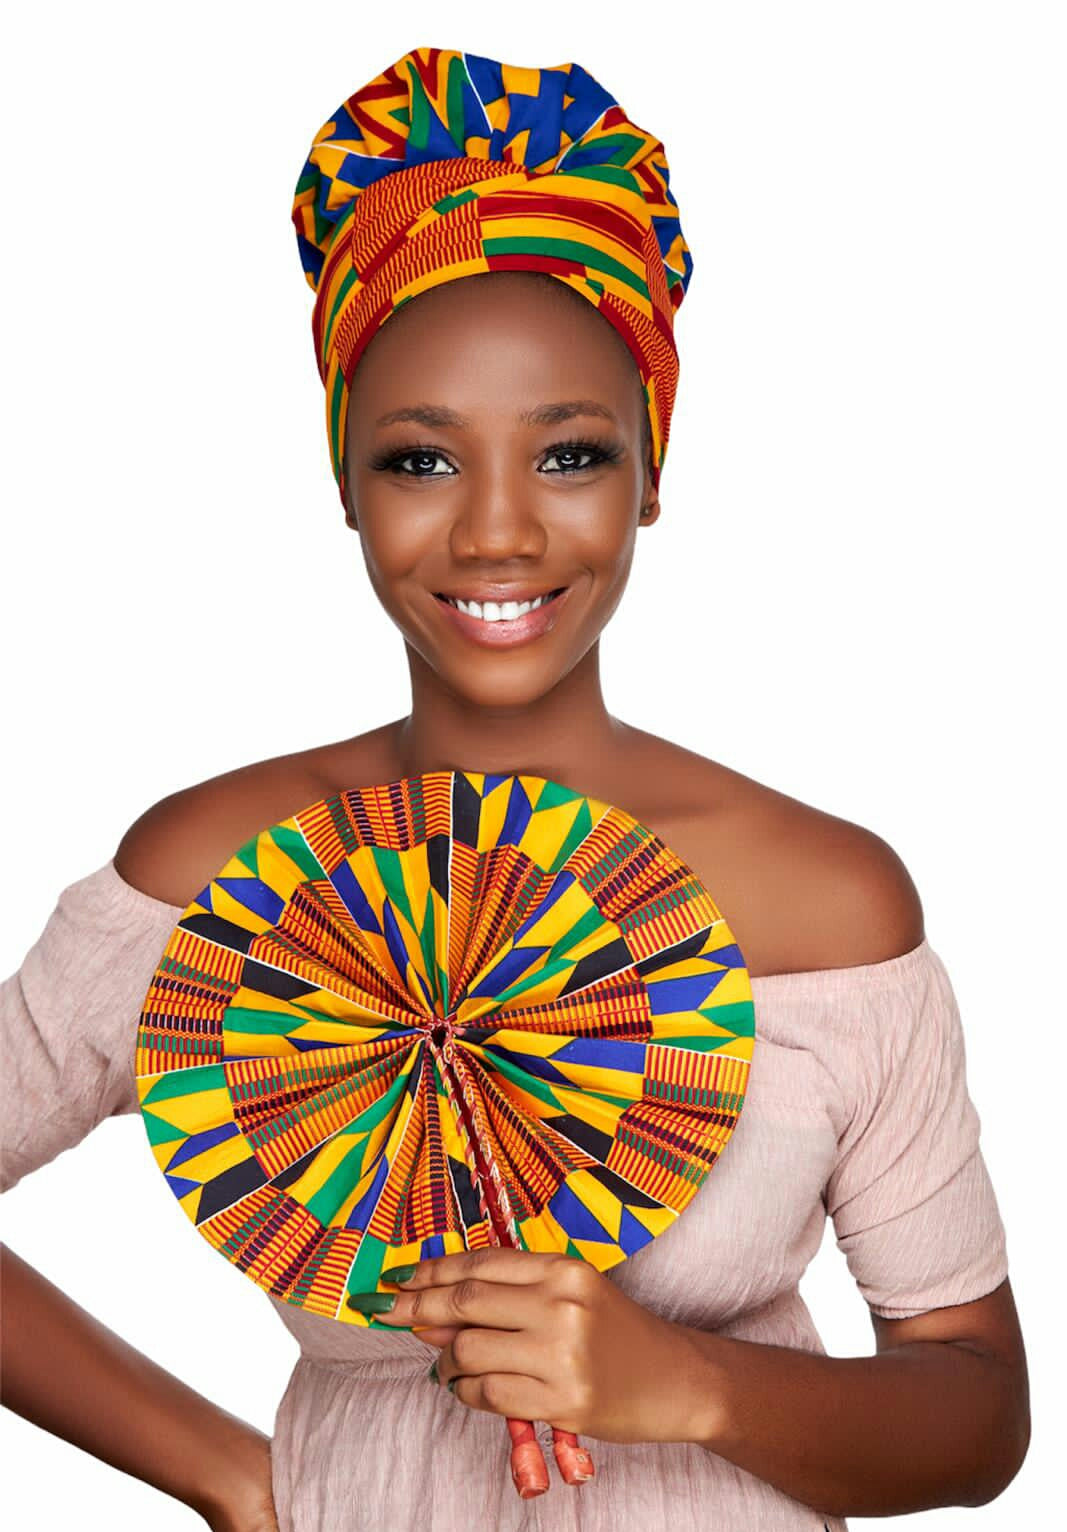 A Ghanaian Wax Print Made of Blue, Green, Red and White Blended Beautiful Colours And Pattern, Hand Made Elastic Silklined Bonnet With Band